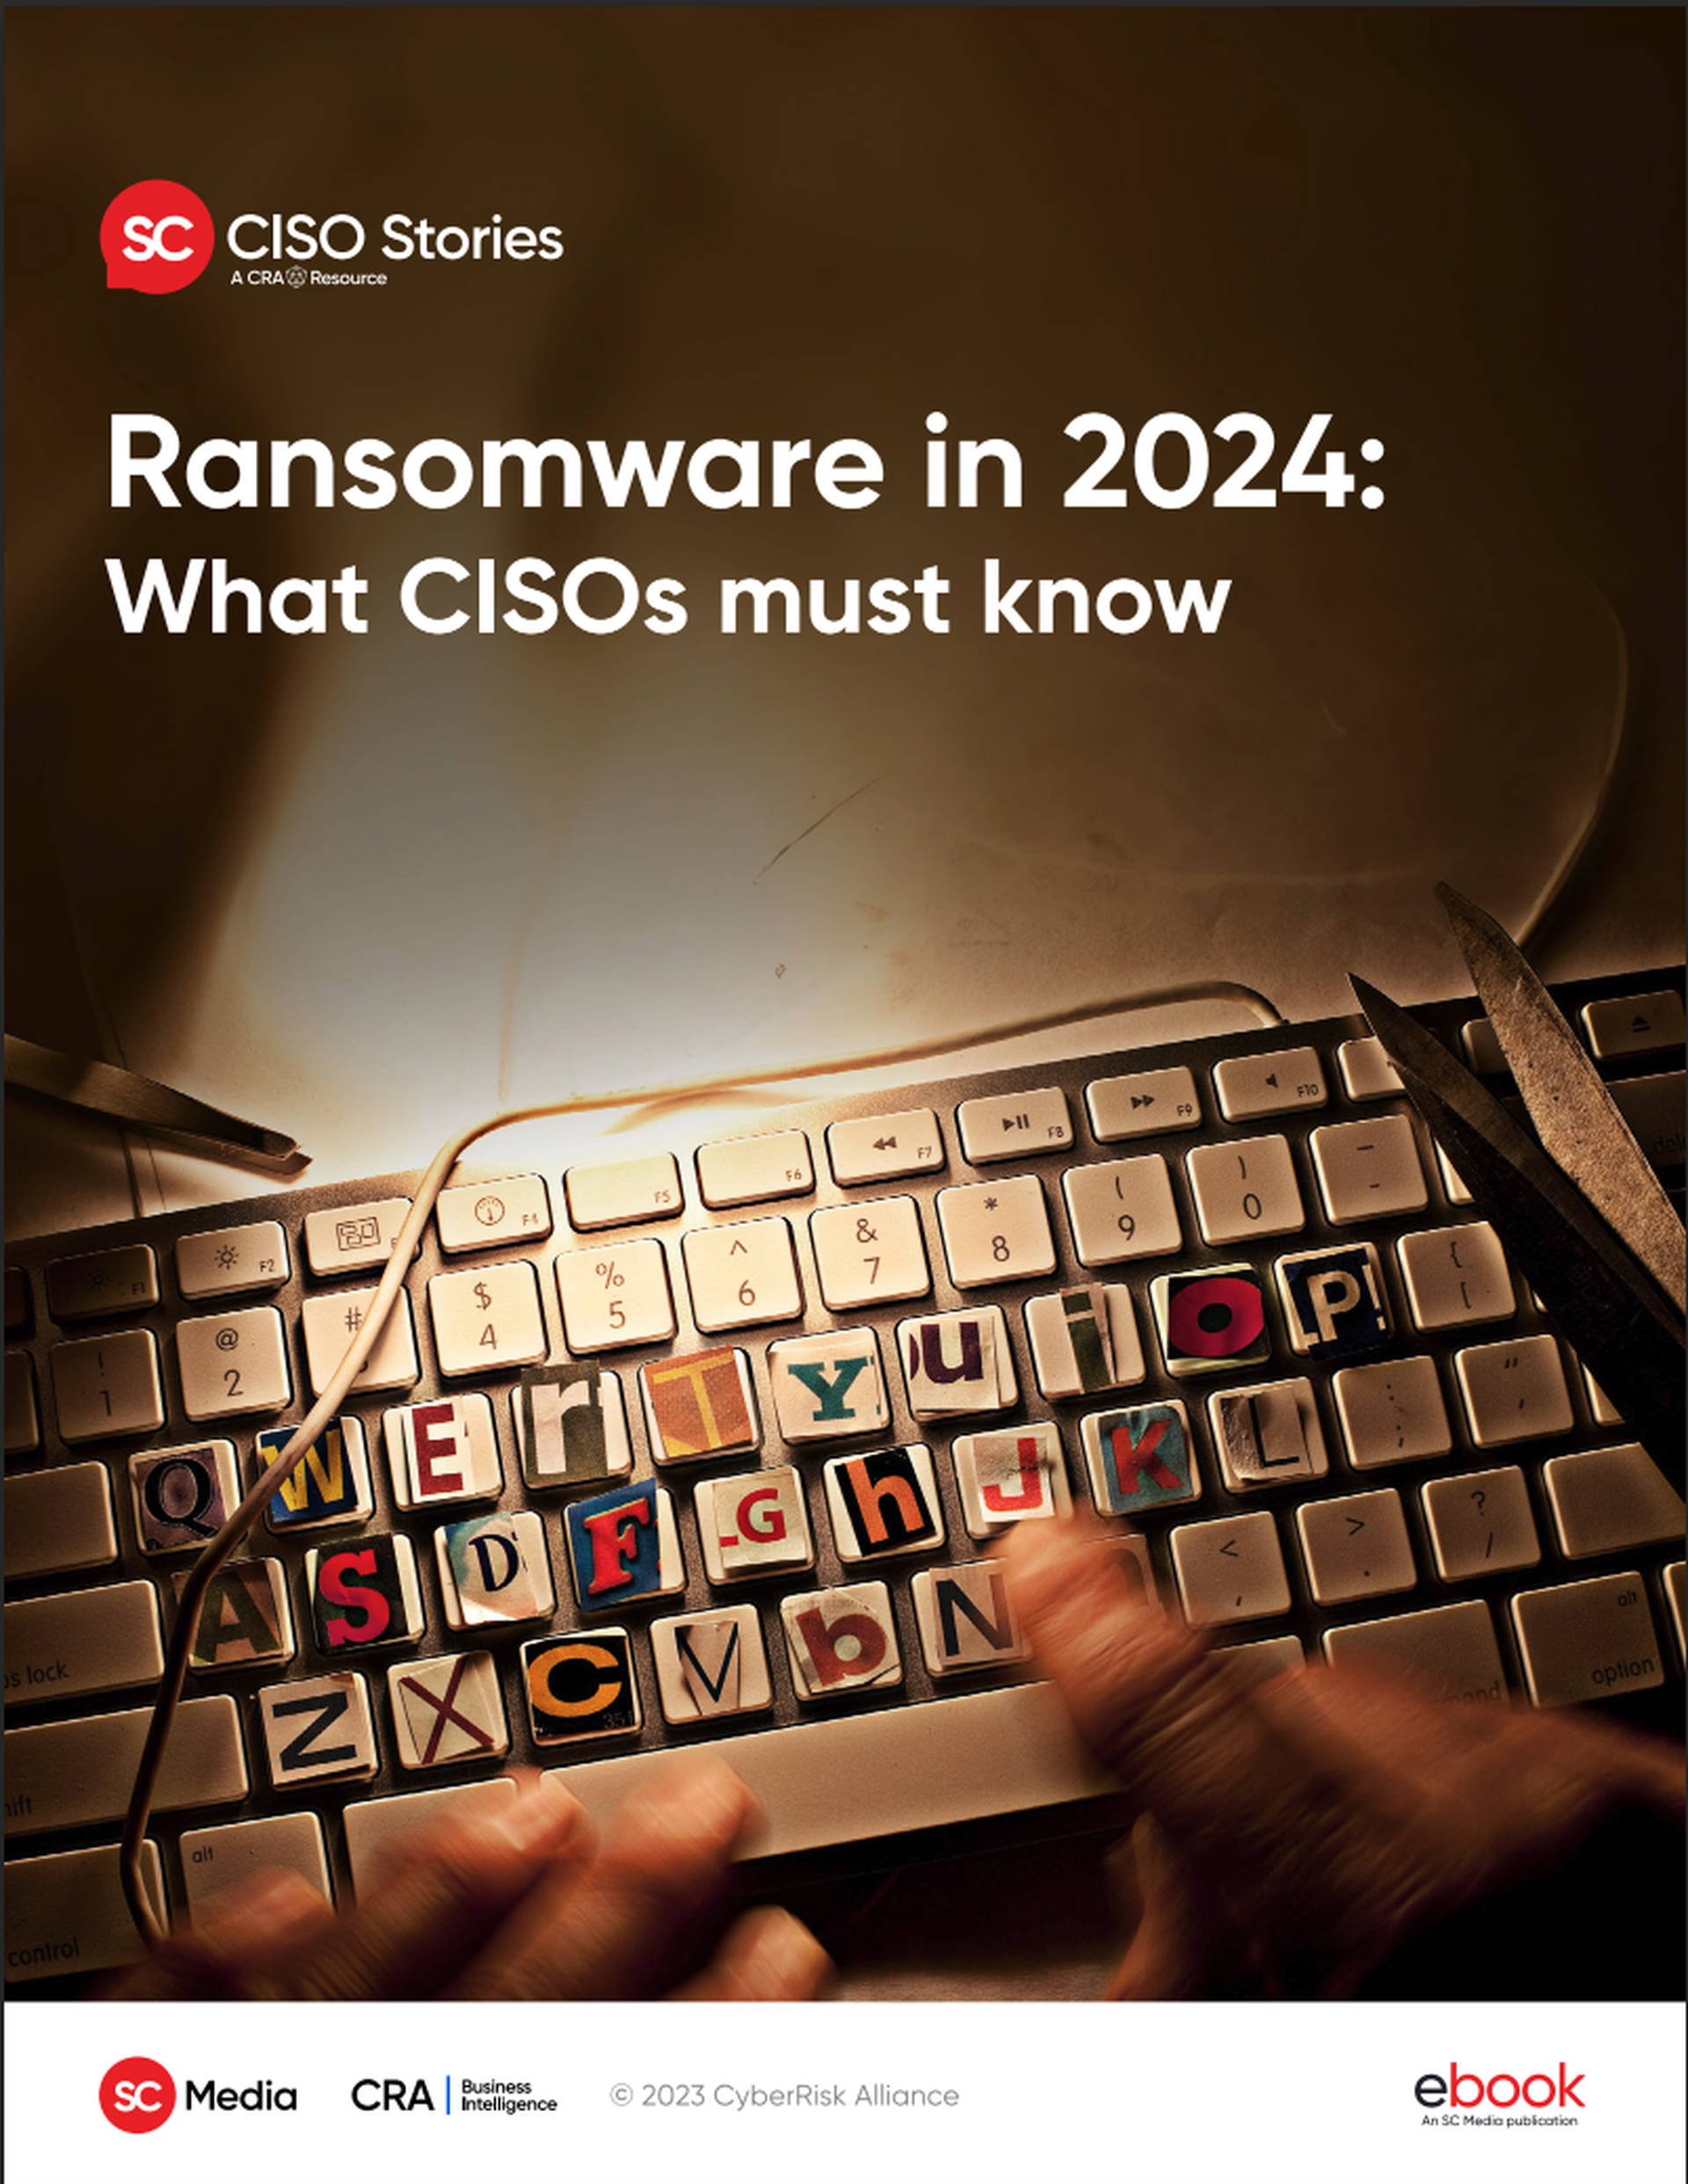 Ransomware in 2024: What CISOs must know